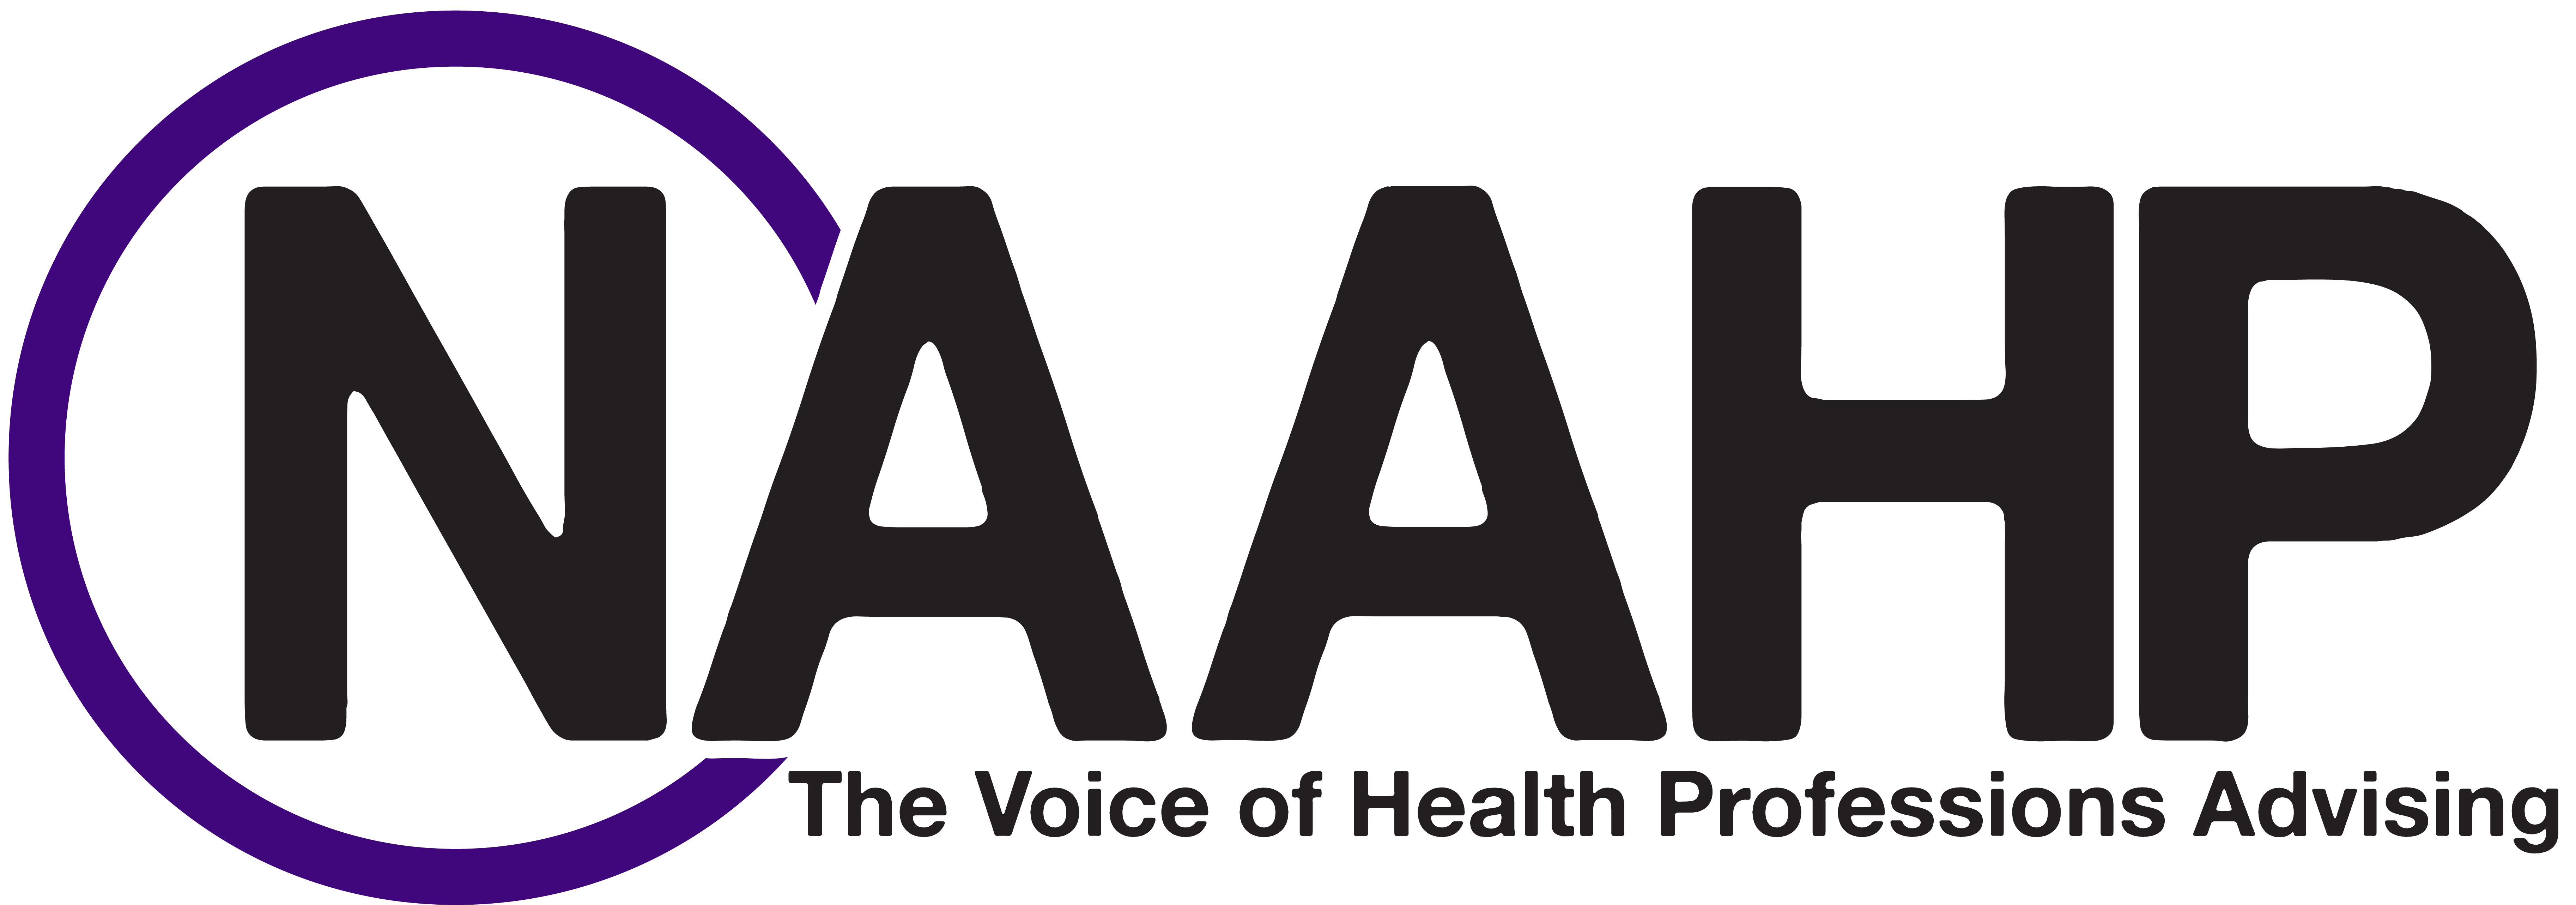 NAAHP, The Voice of Health Professions Advising